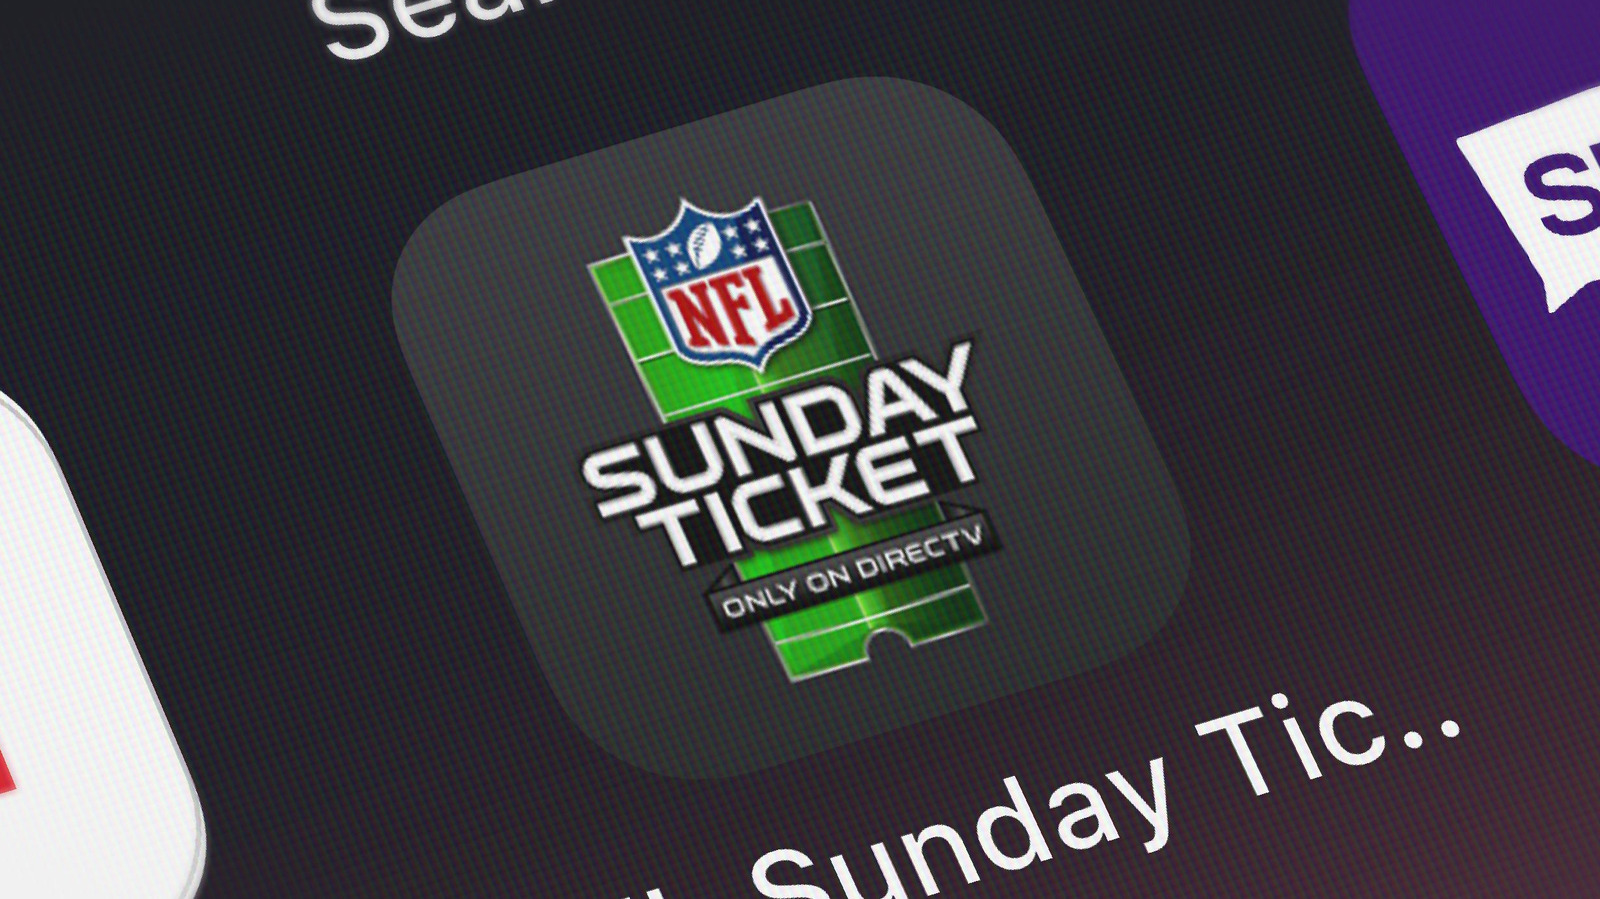 directv sunday ticket packages